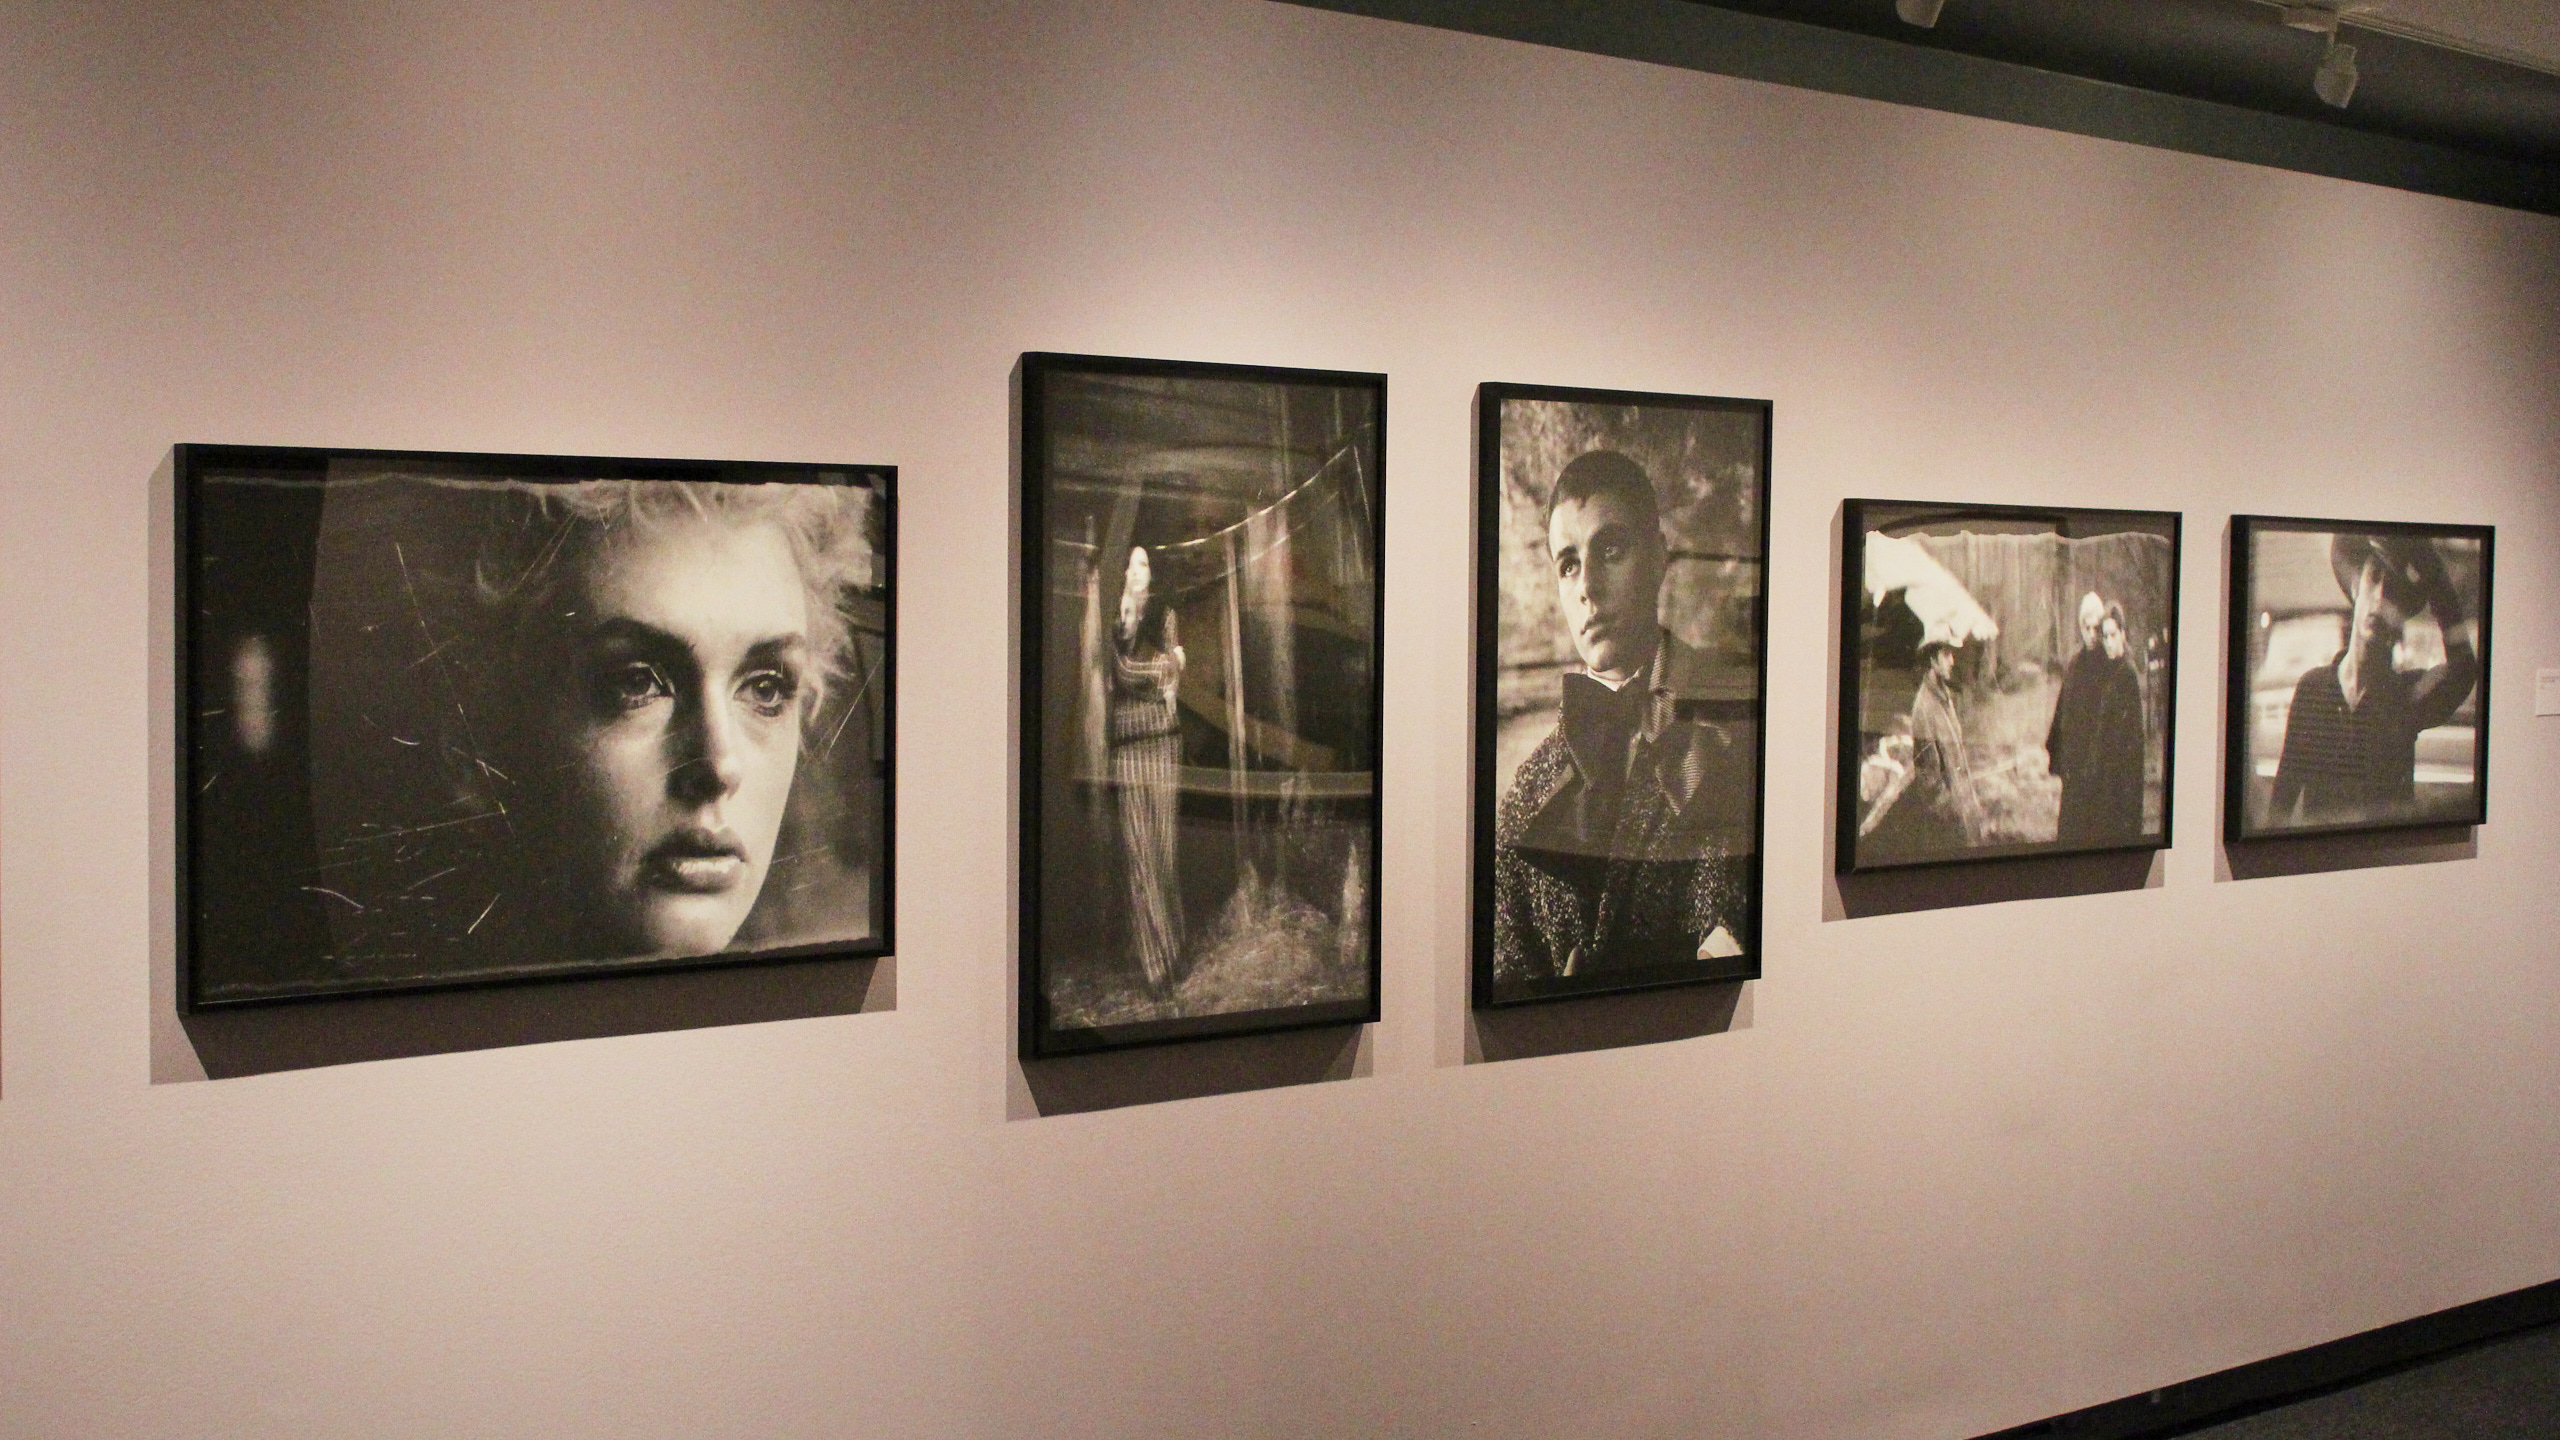 artistic photos hand on the wall at the "Other Worldly" exhibit at TMU's Image Arts building